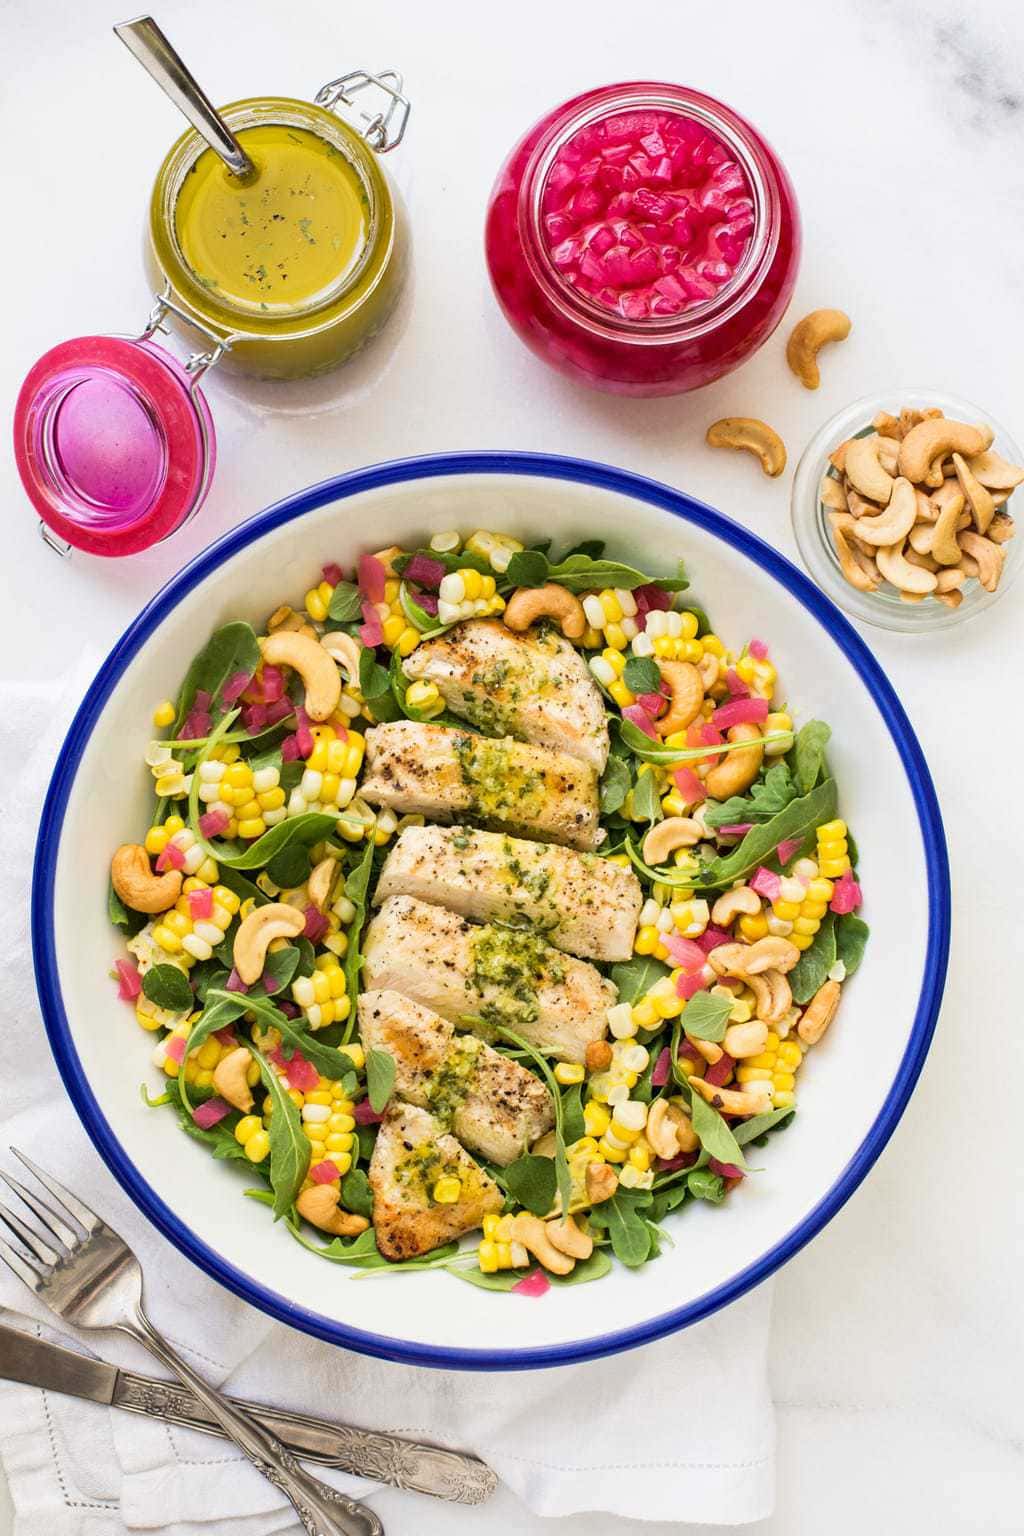 Overhead photo of a serving bowl filled with Lemon Oregano Chicken and Corn Salad. Surrounding the bowl are many of the ingredients used in making this salad.